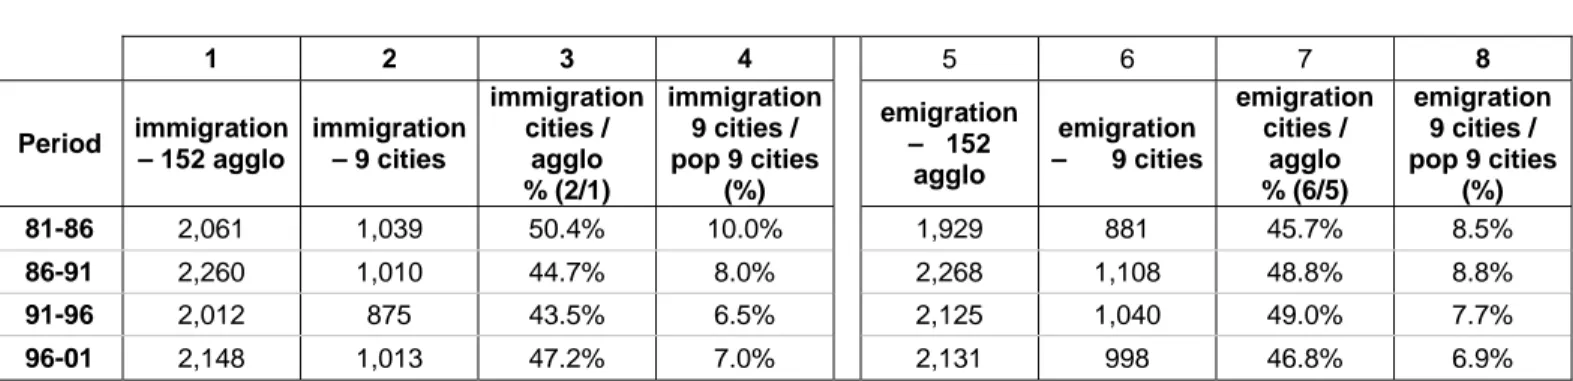 Table 14 – Internal immigration and emigration, total flows, 1981-2001 (in thousands) *  1 2 3 4  5 6 7 8  Period  immigration  – 152 agglo  immigration  – 9 cities  immigration cities / agglo  % (2/1)  immigration 9 cities / pop 9 cities (%)  emigration –